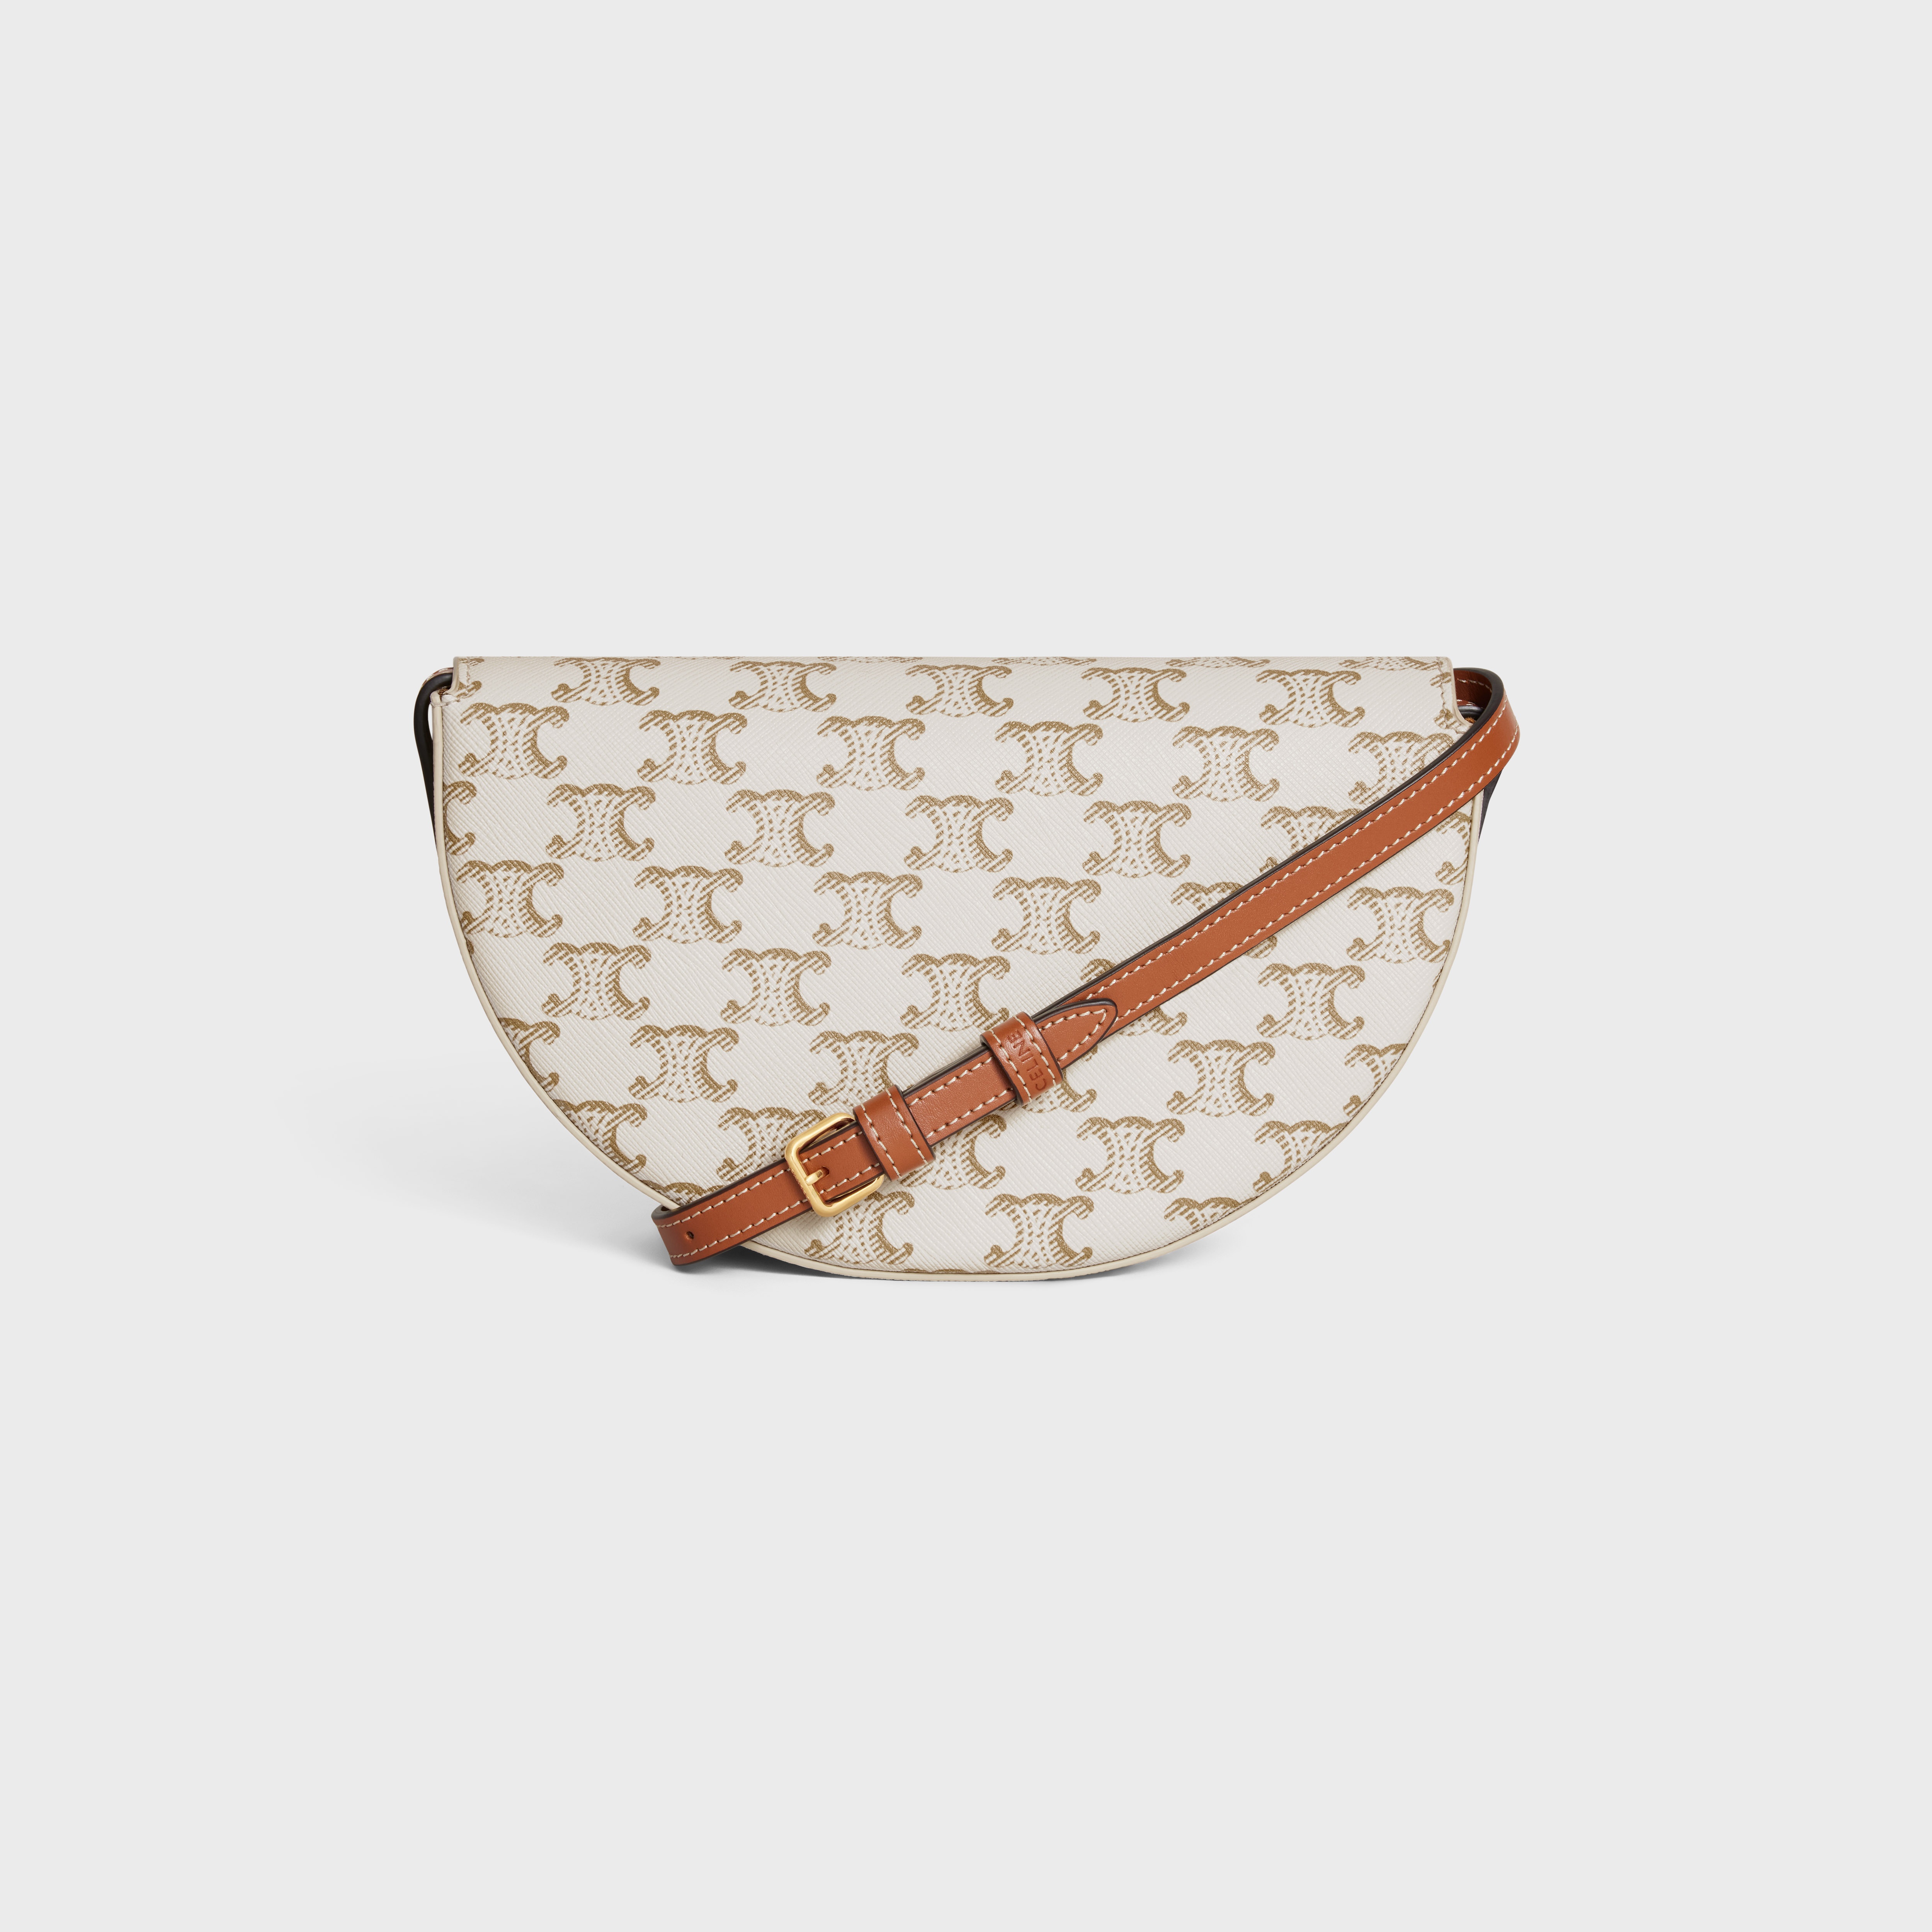 LONG POUCH WITH STRAP CUIR TRIOMPHE in triomphe canvas and calfskin